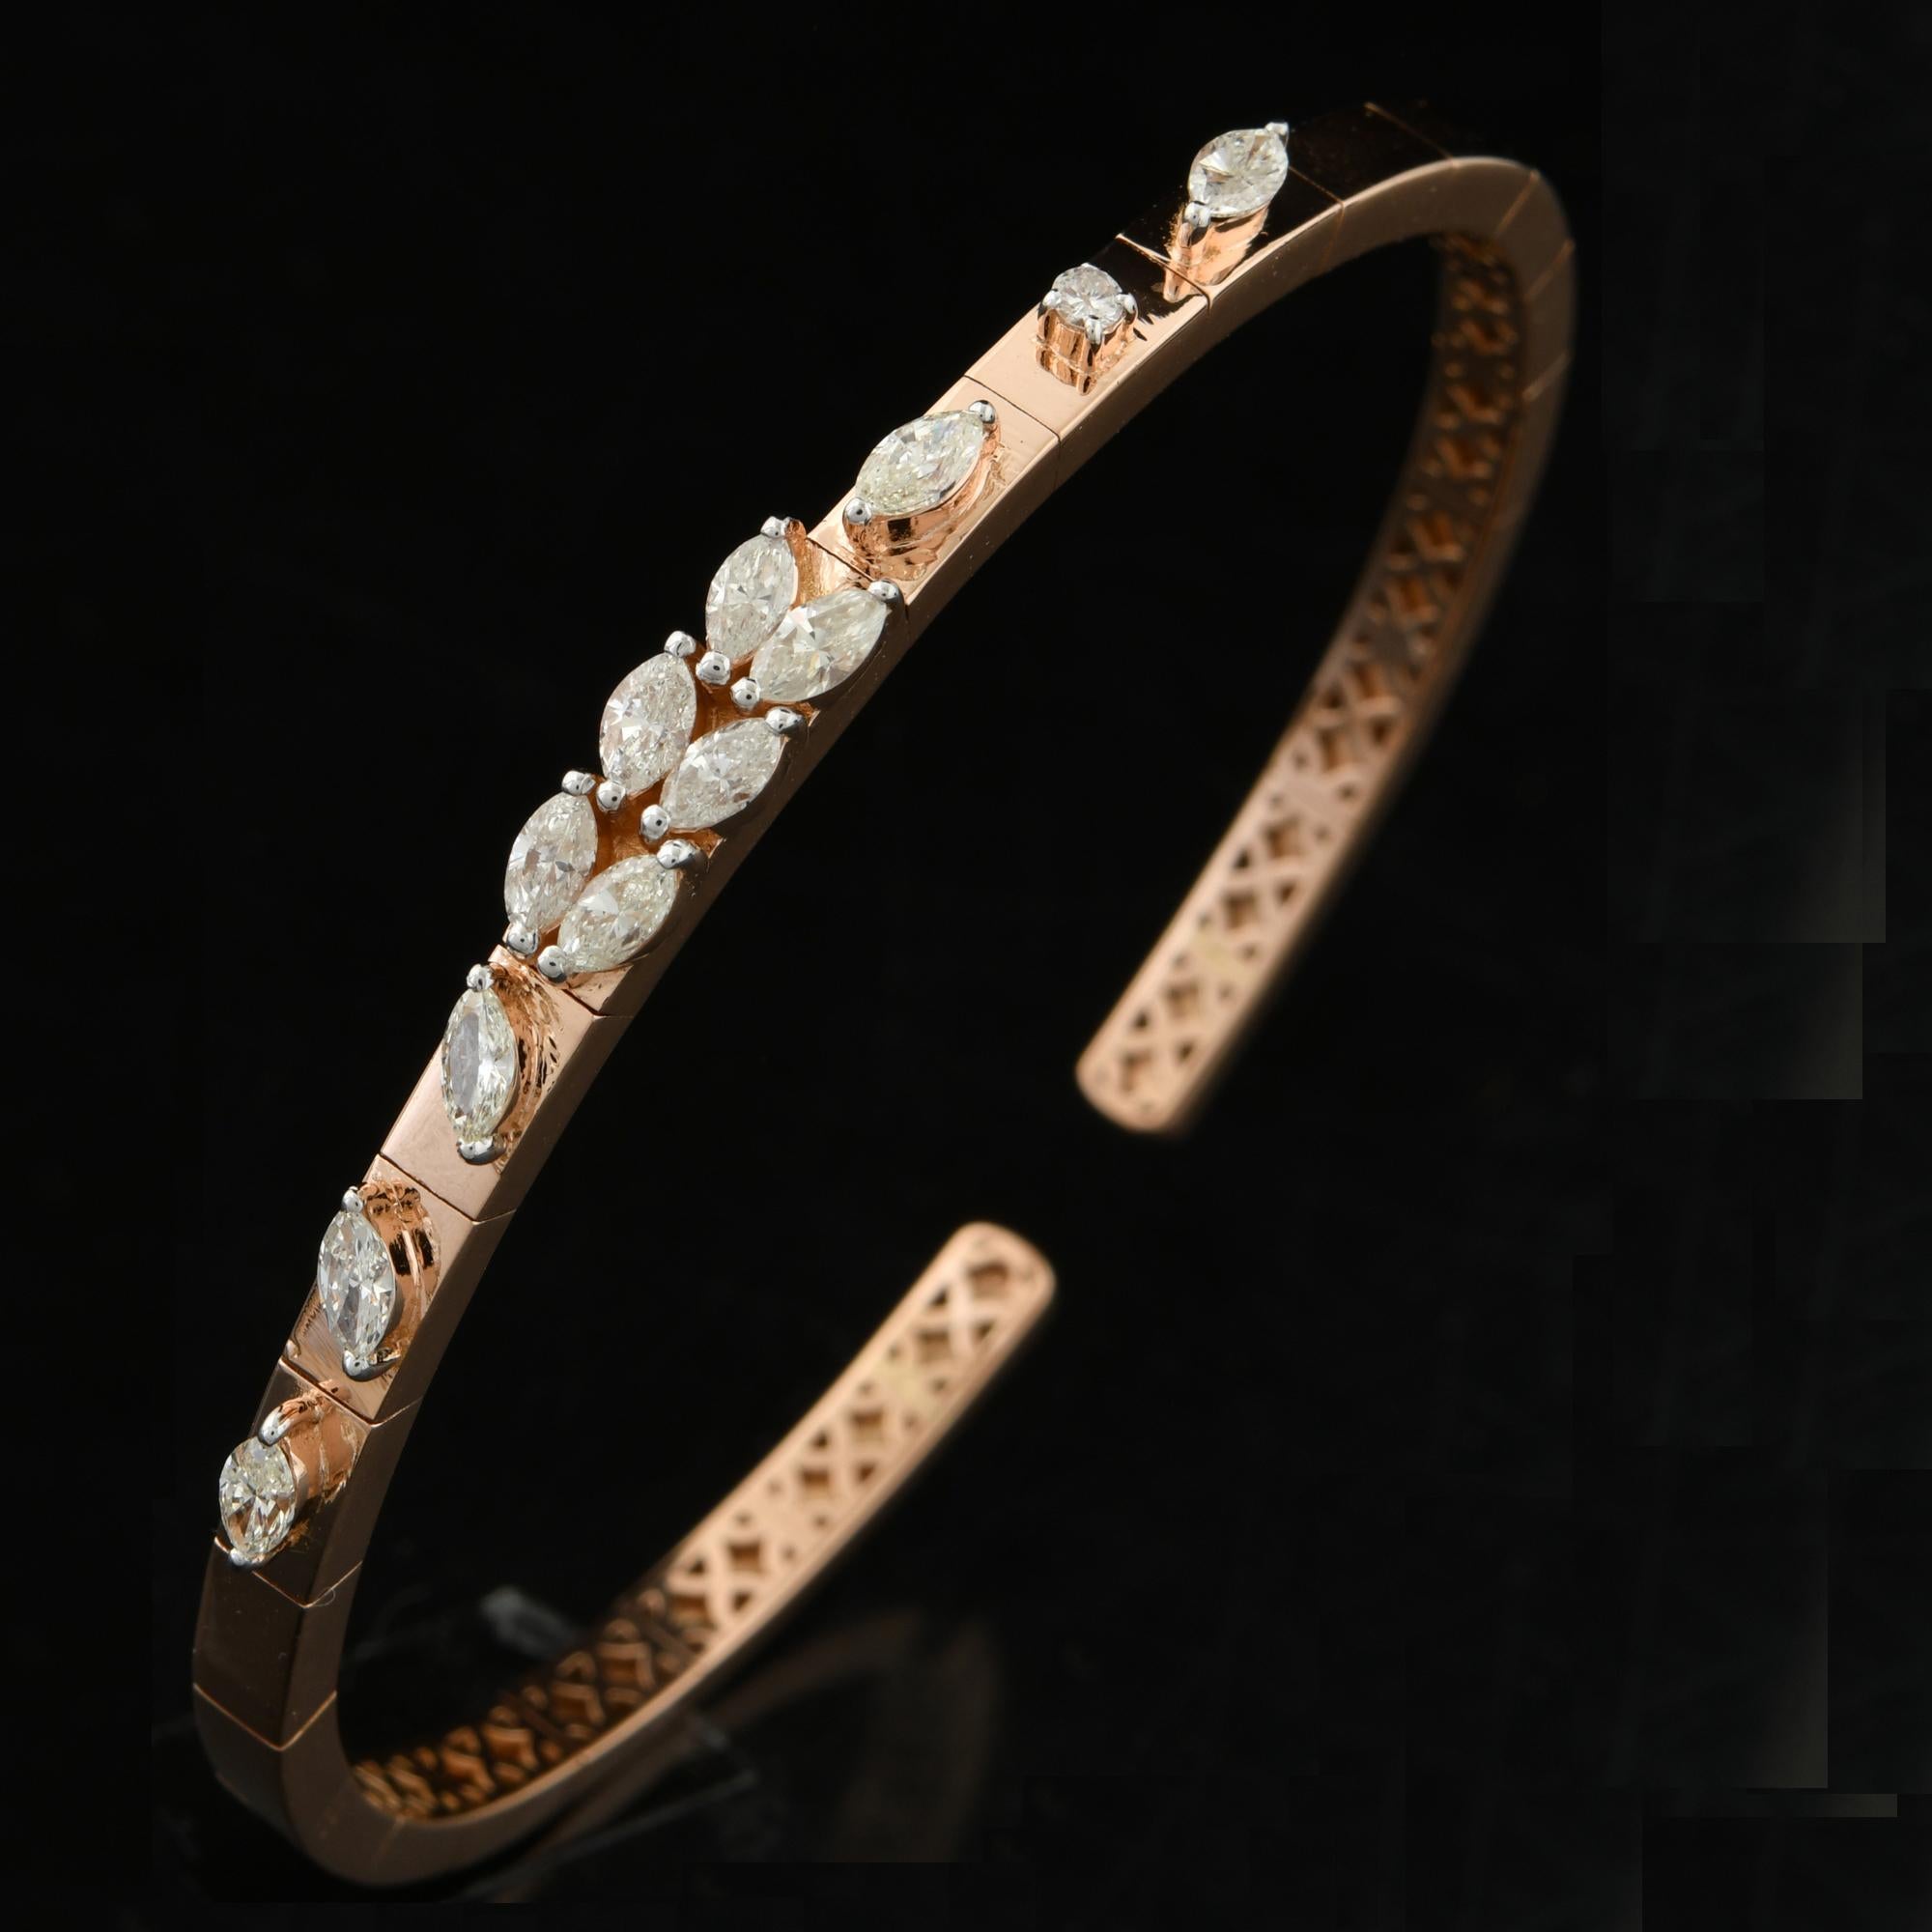 The bracelet features a sleek and modern design, with a cuff-style bangle that gracefully wraps around the wrist. The bangle is crafted from high-quality 14 karat yellow gold, renowned for its rich and warm hue. The gold has been expertly polished